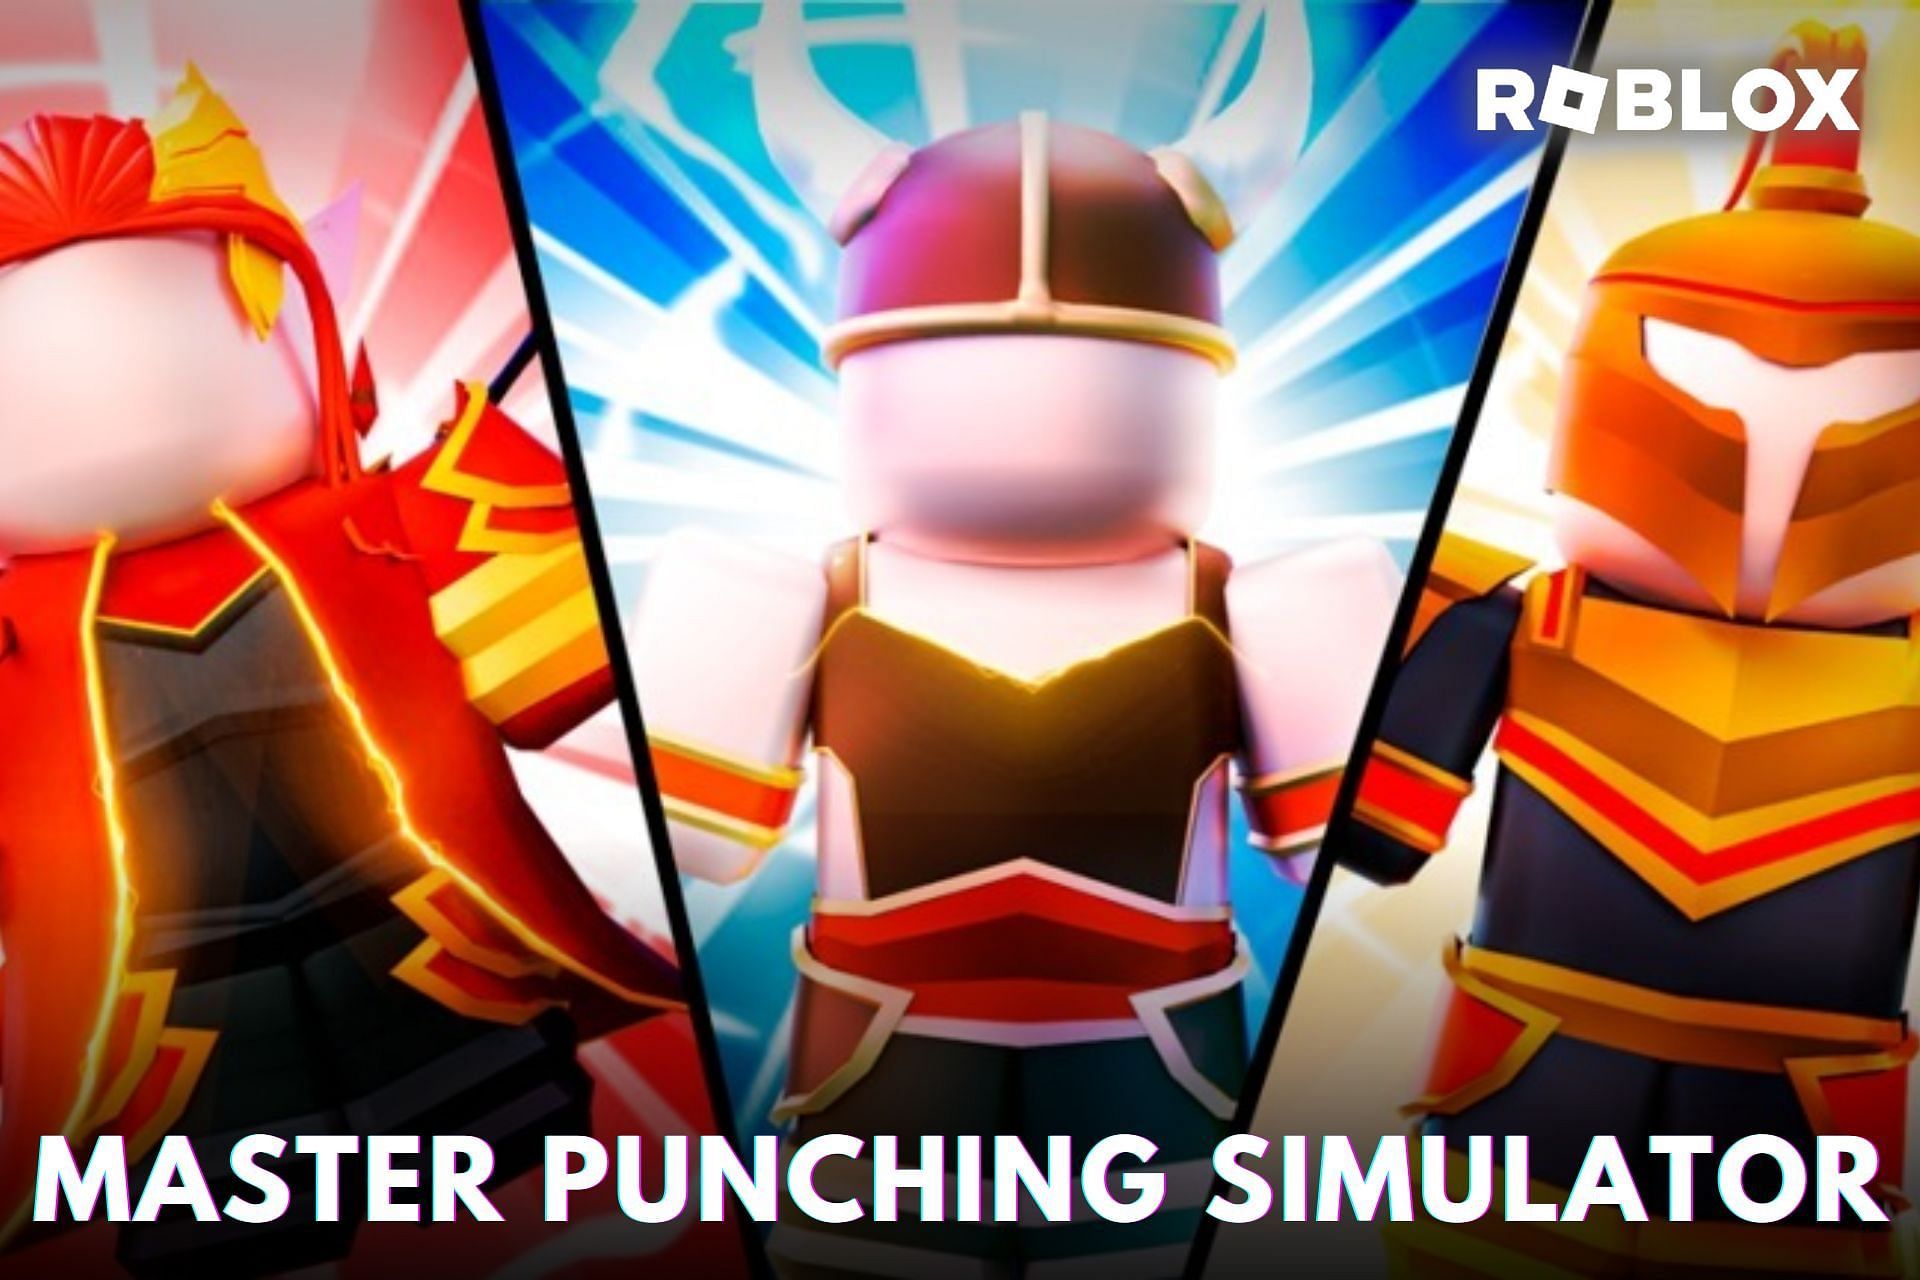 Roblox Master Punching Simulator Codes For November 2022 Free Boosts Gems And Pets